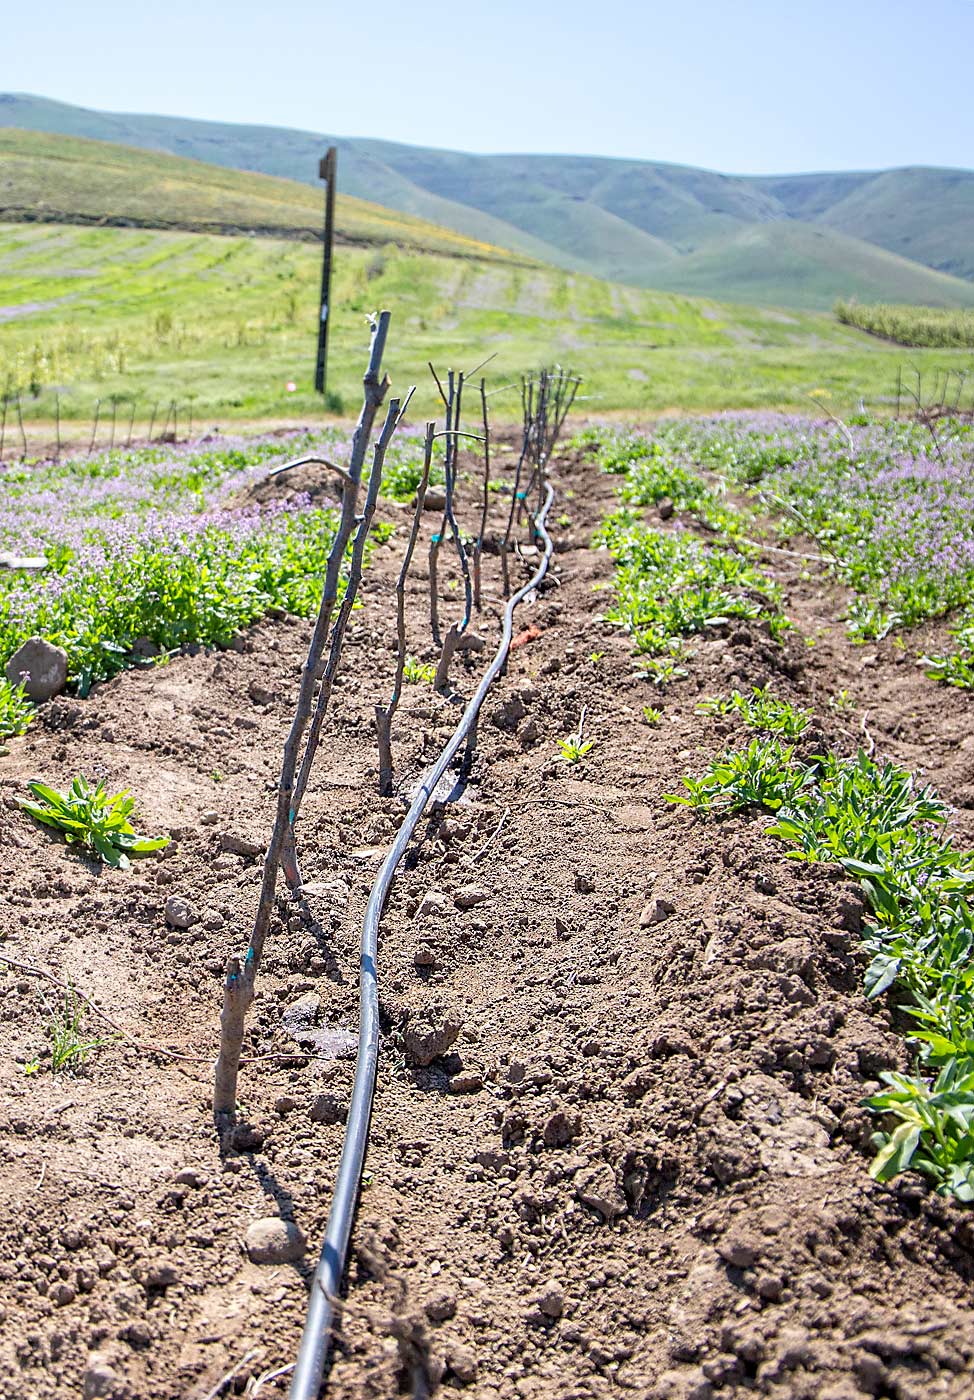 Drip tape irrigates a newly planted apple orchard in April 2019 with iron-laden water drawn from deep wells at Green Acre Farms in White Swan, Washington. Different sources of irrigation water — surface canals or groundwater — can change soil chemistry and therefore tree nutrient needs over time. (Ross Courtney/Good Fruit Grower)